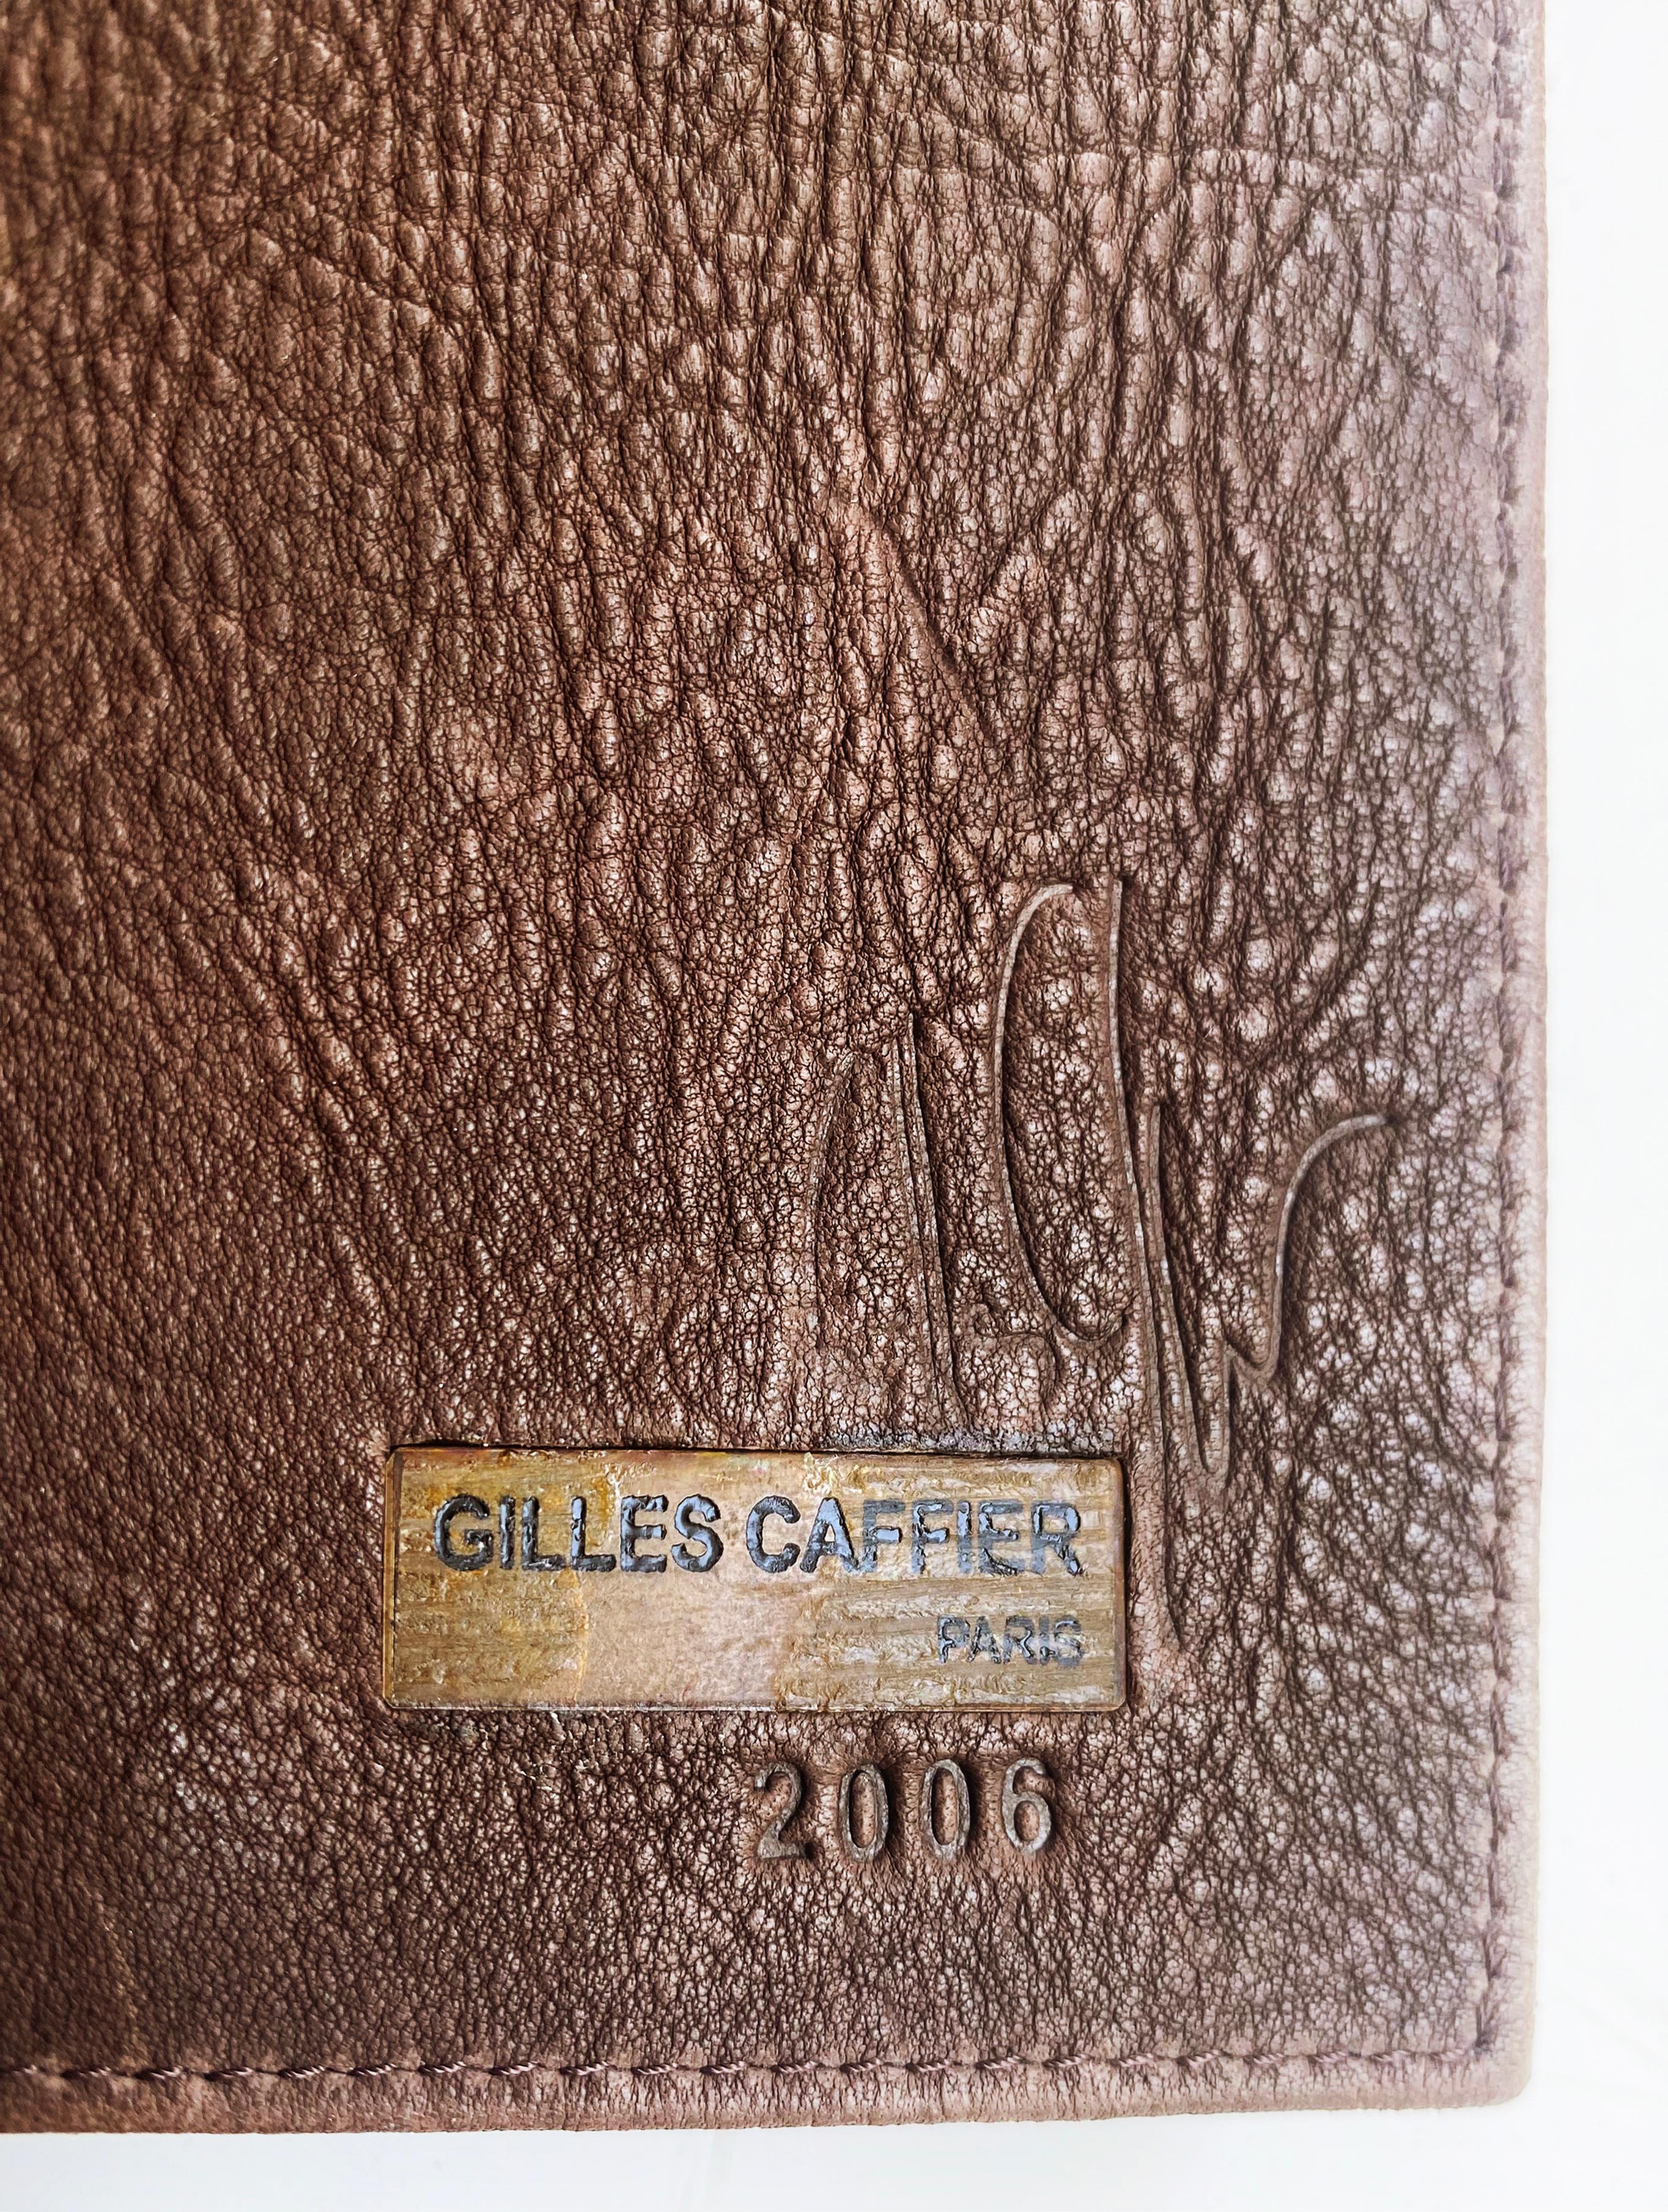 Gilles Caffier Leather Clad Vanity Tray Made in France 2006 For Sale 1